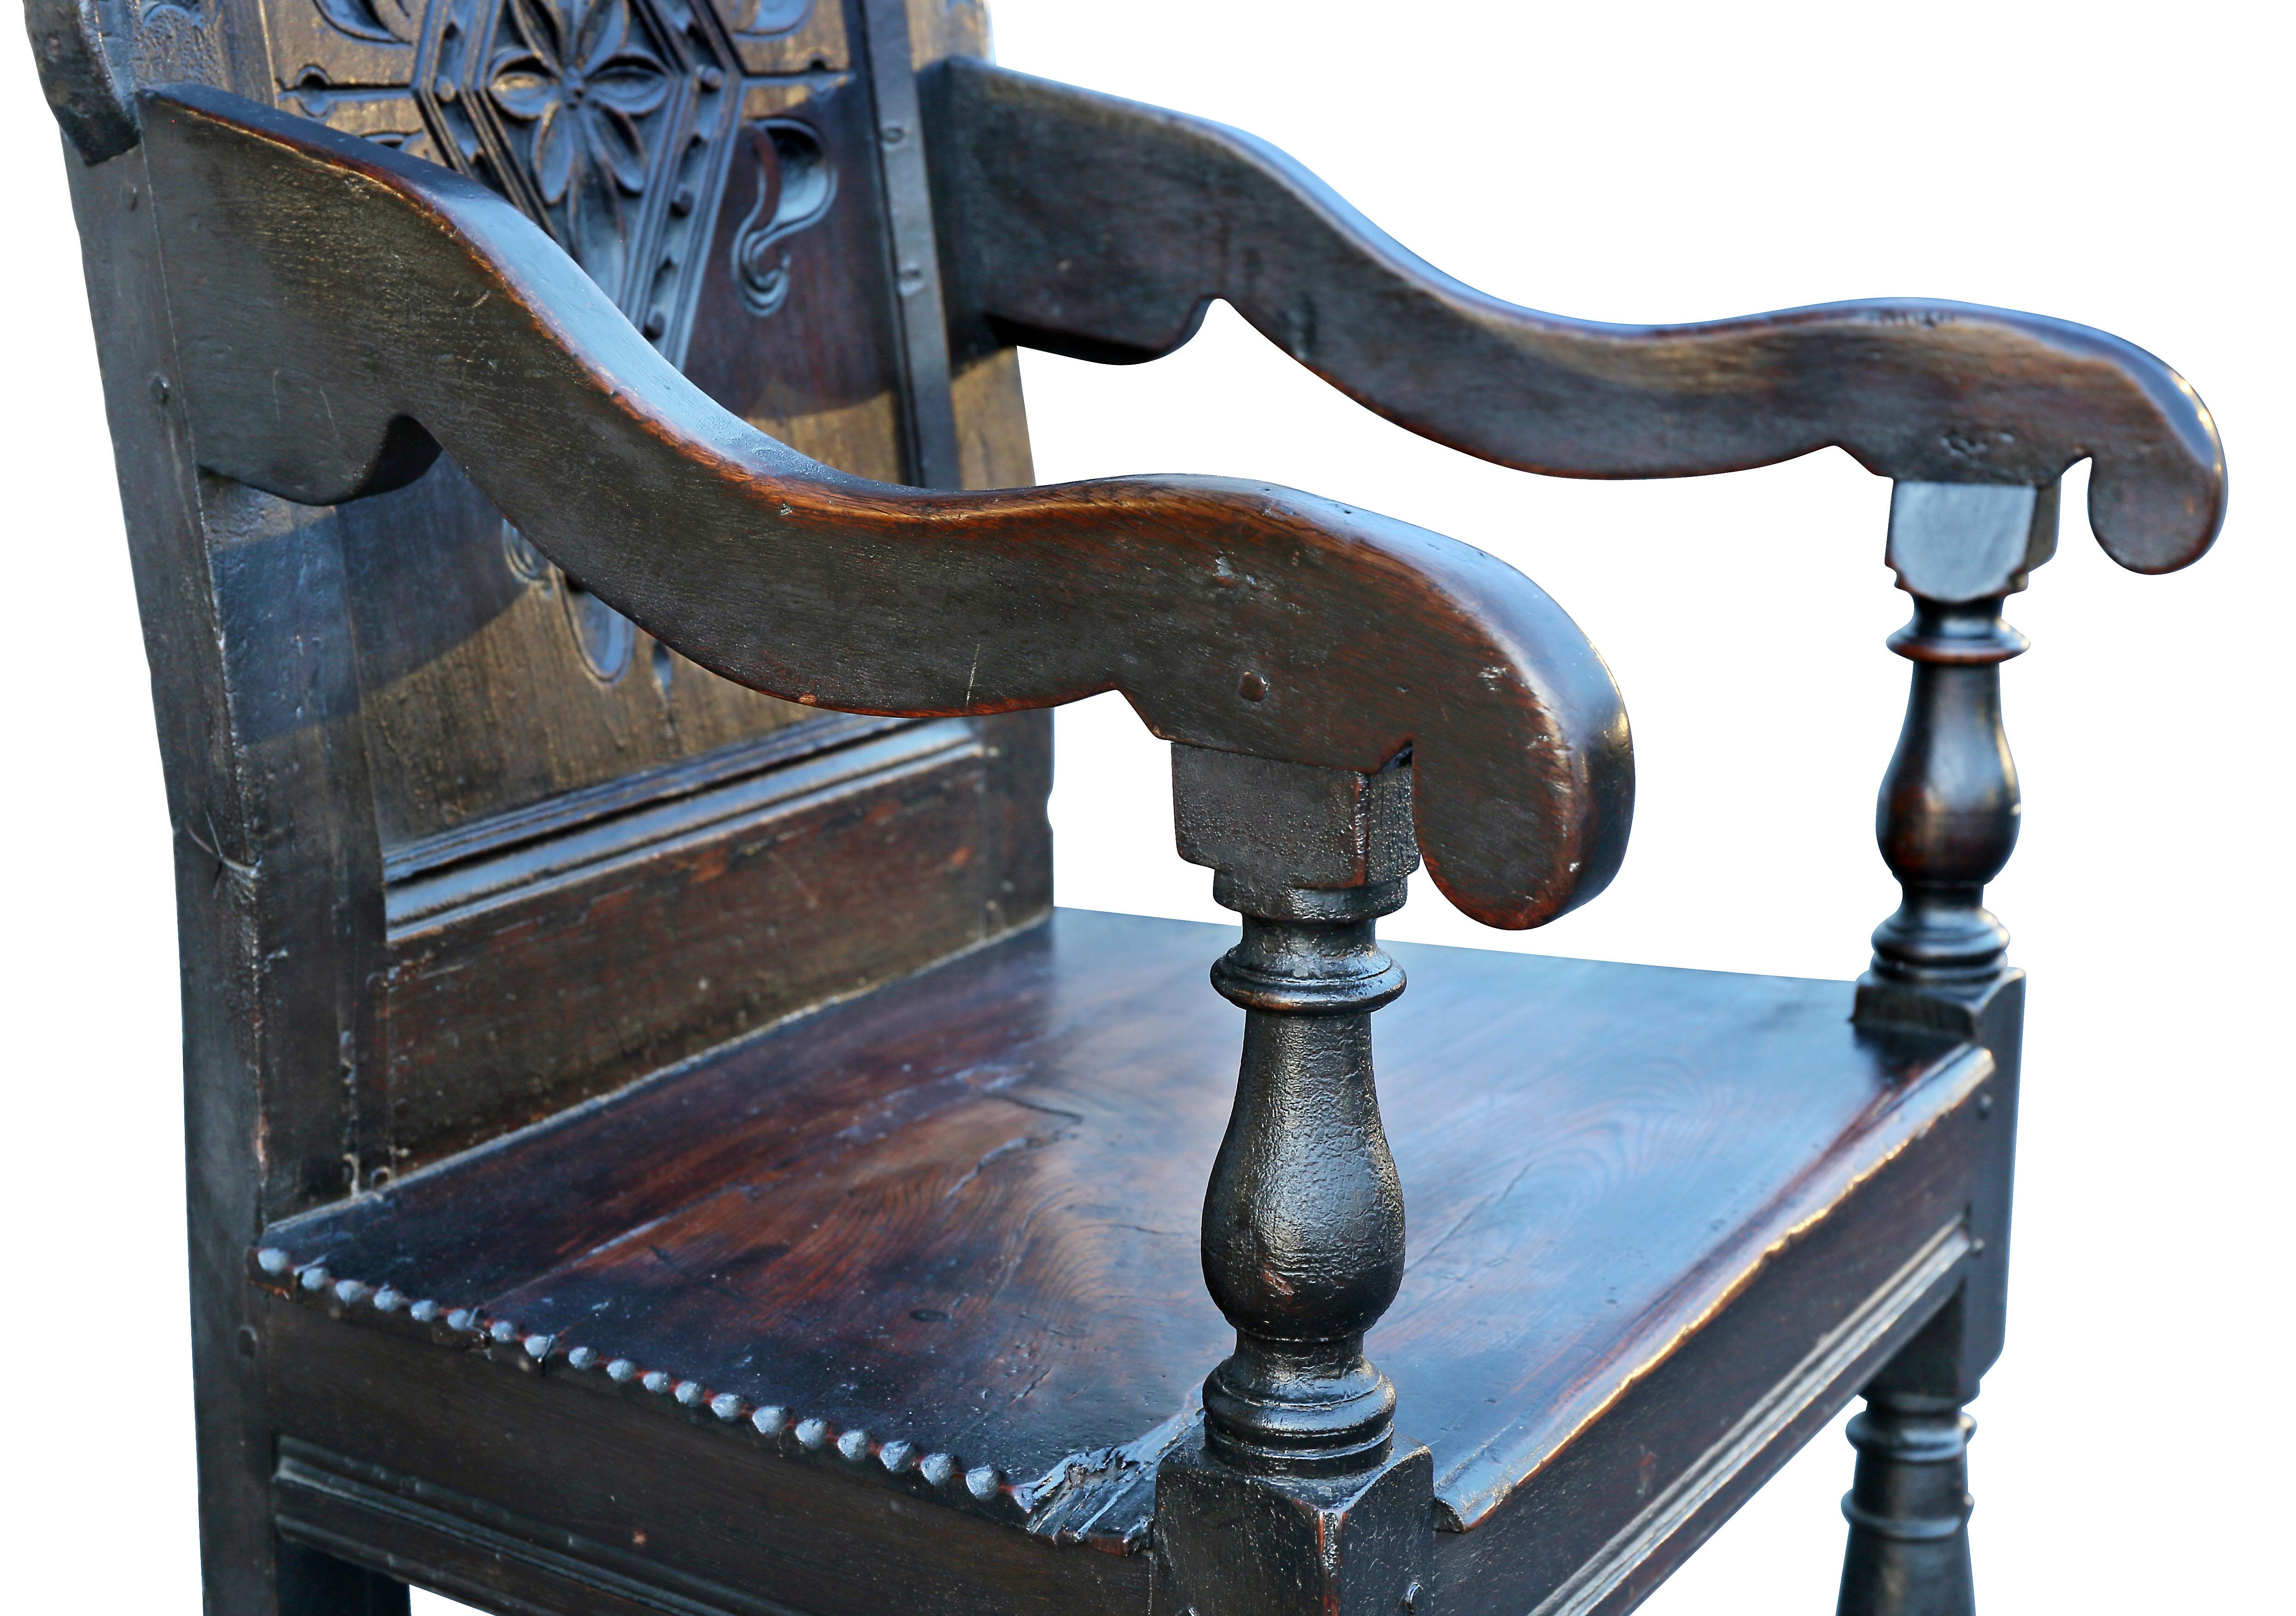 Double arched carved back over a panel with diamond panel, down scrolled arms, paneled seat raised on turned legs and box stretchers.